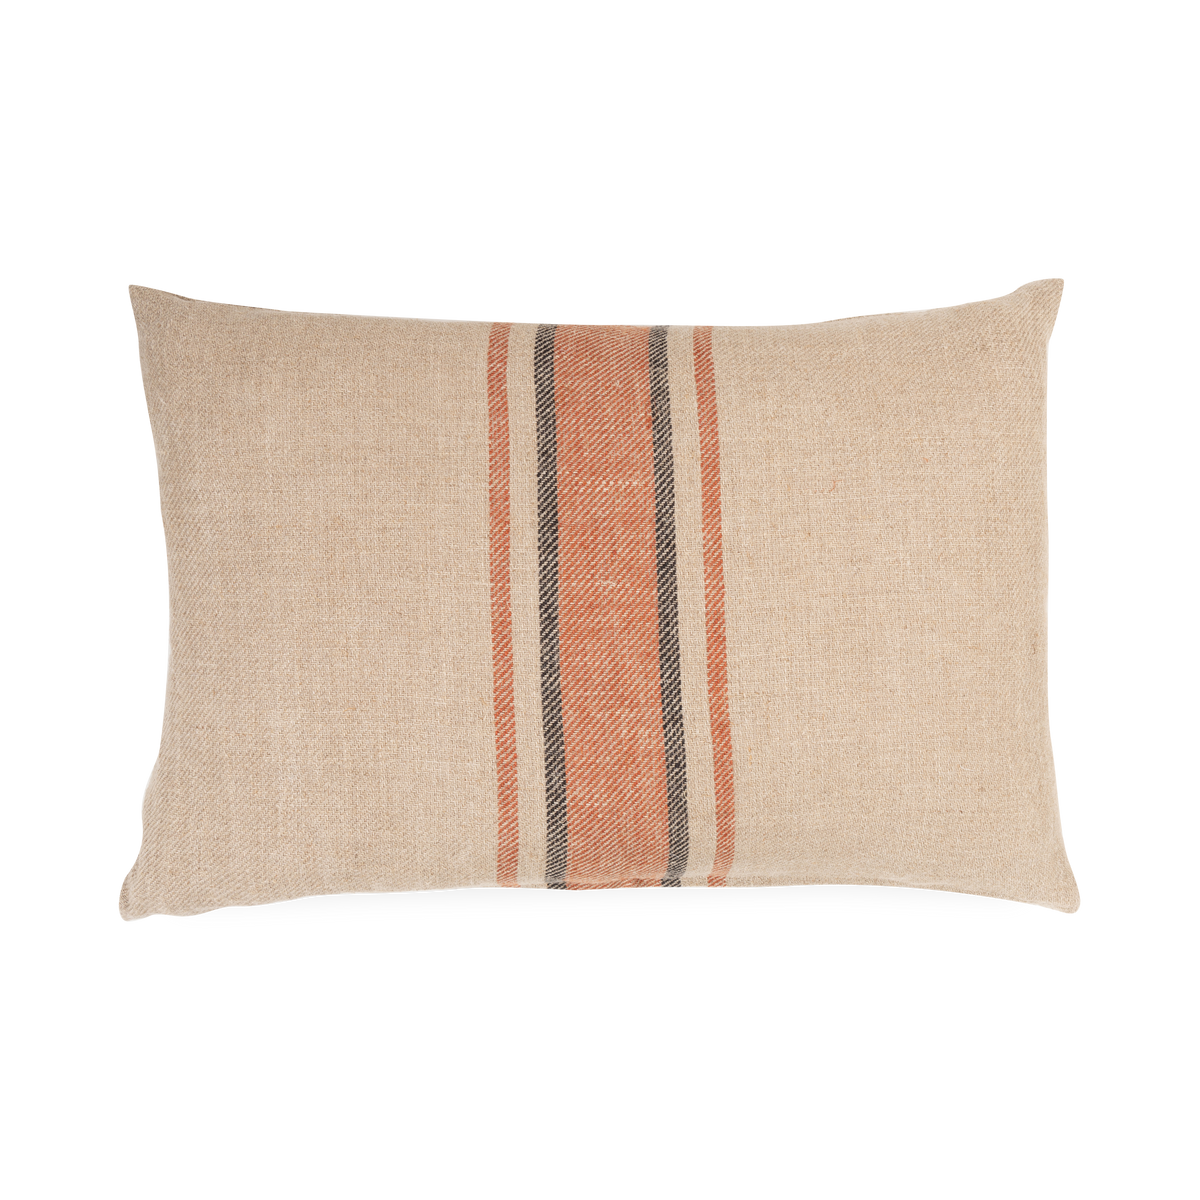 Introduce organic warmth into your space with the Linen Stripe Pillow.